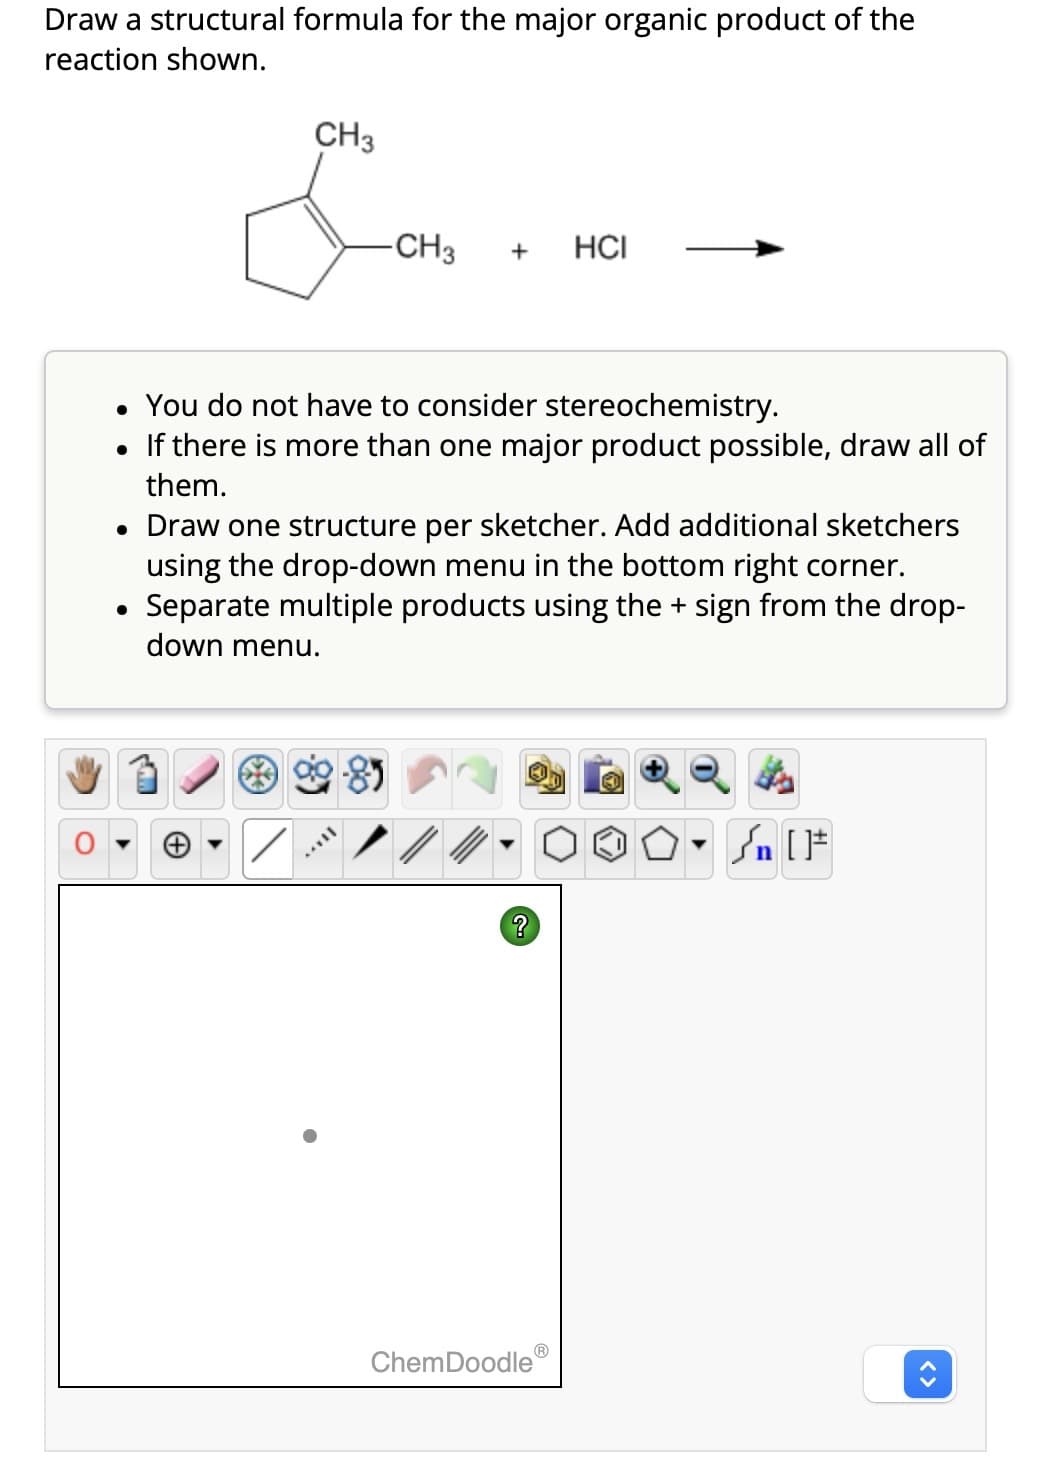 Draw a structural formula for the major organic product of the
reaction shown.
CH3
-CH3 + HCI
• You do not have to consider stereochemistry.
• If there is more than one major product possible, draw all of
them.
• Draw one structure per sketcher. Add additional sketchers
using the drop-down menu in the bottom right corner.
Separate multiple products using the + sign from the drop-
down menu.
TAYY
?
ChemDoodle
- Sn [F